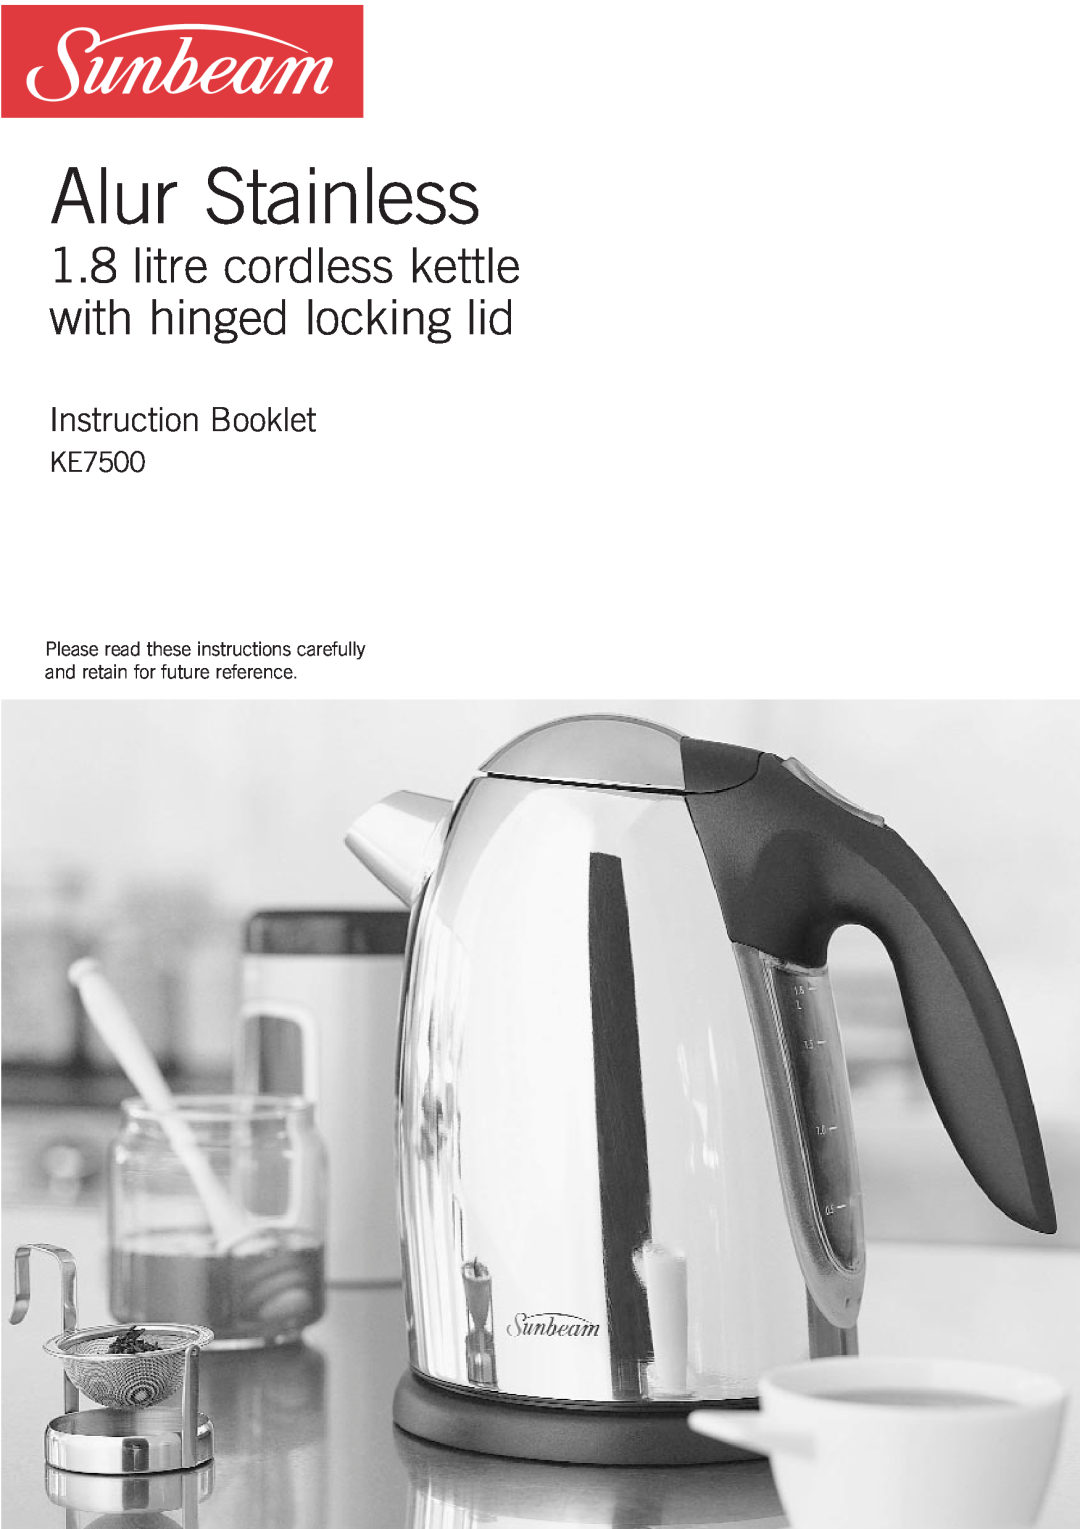 Sunbeam KE7500 manual Alur Stainless, litre cordless kettle with hinged locking lid, Instruction Booklet 